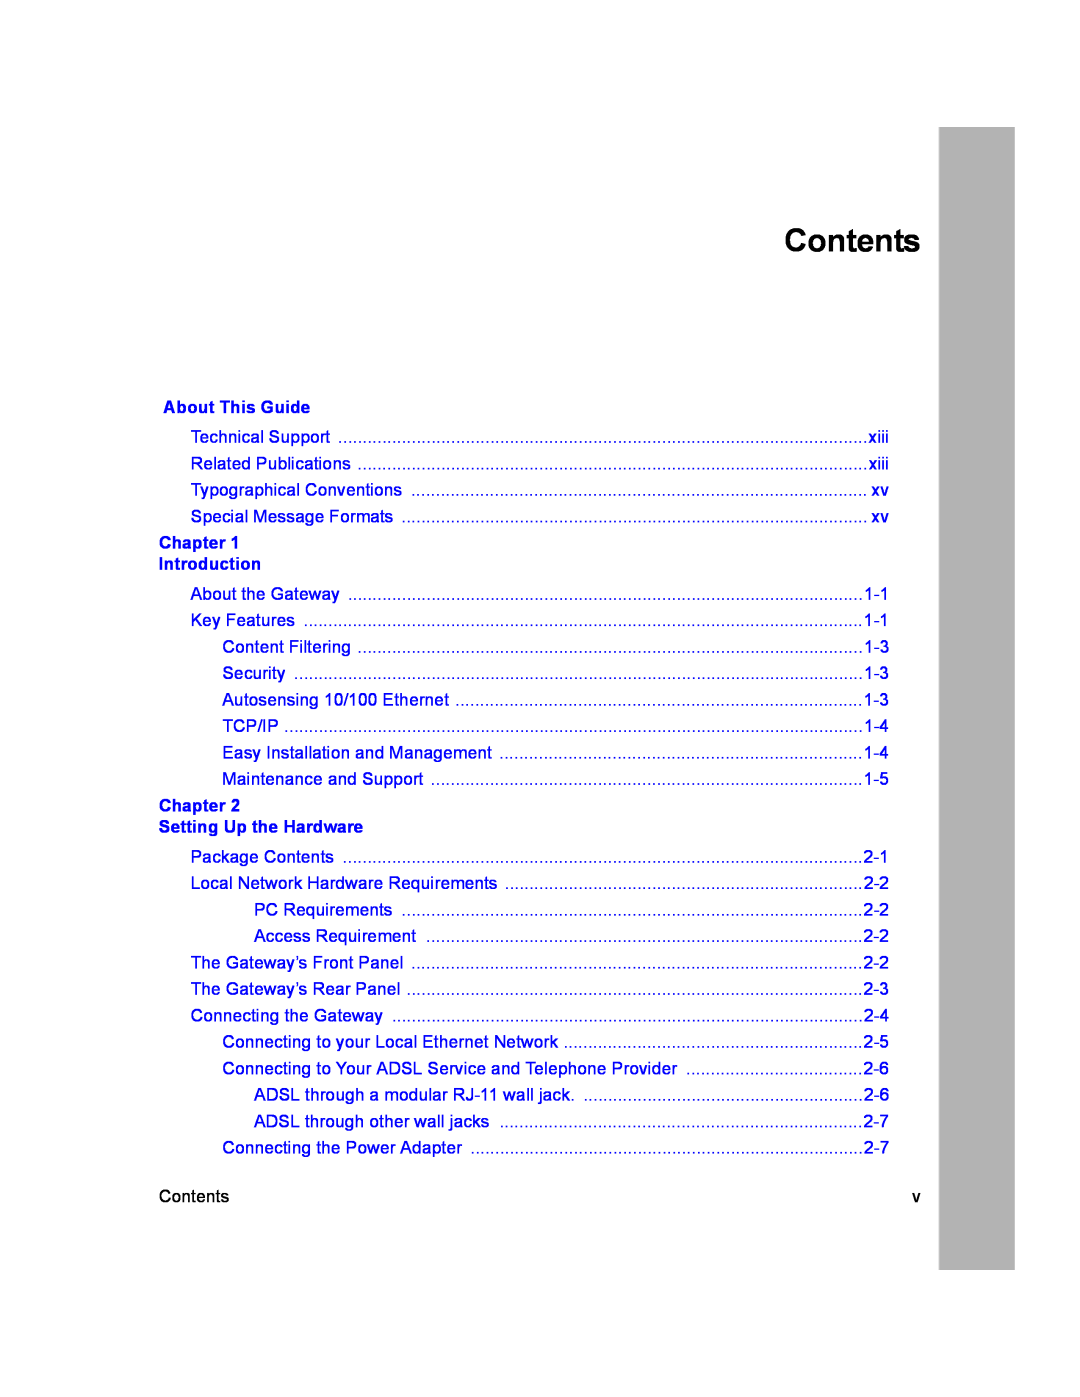 NETGEAR DG814 DSL manual Contents, About This Guide, Chapter, Introduction, Setting Up the Hardware 